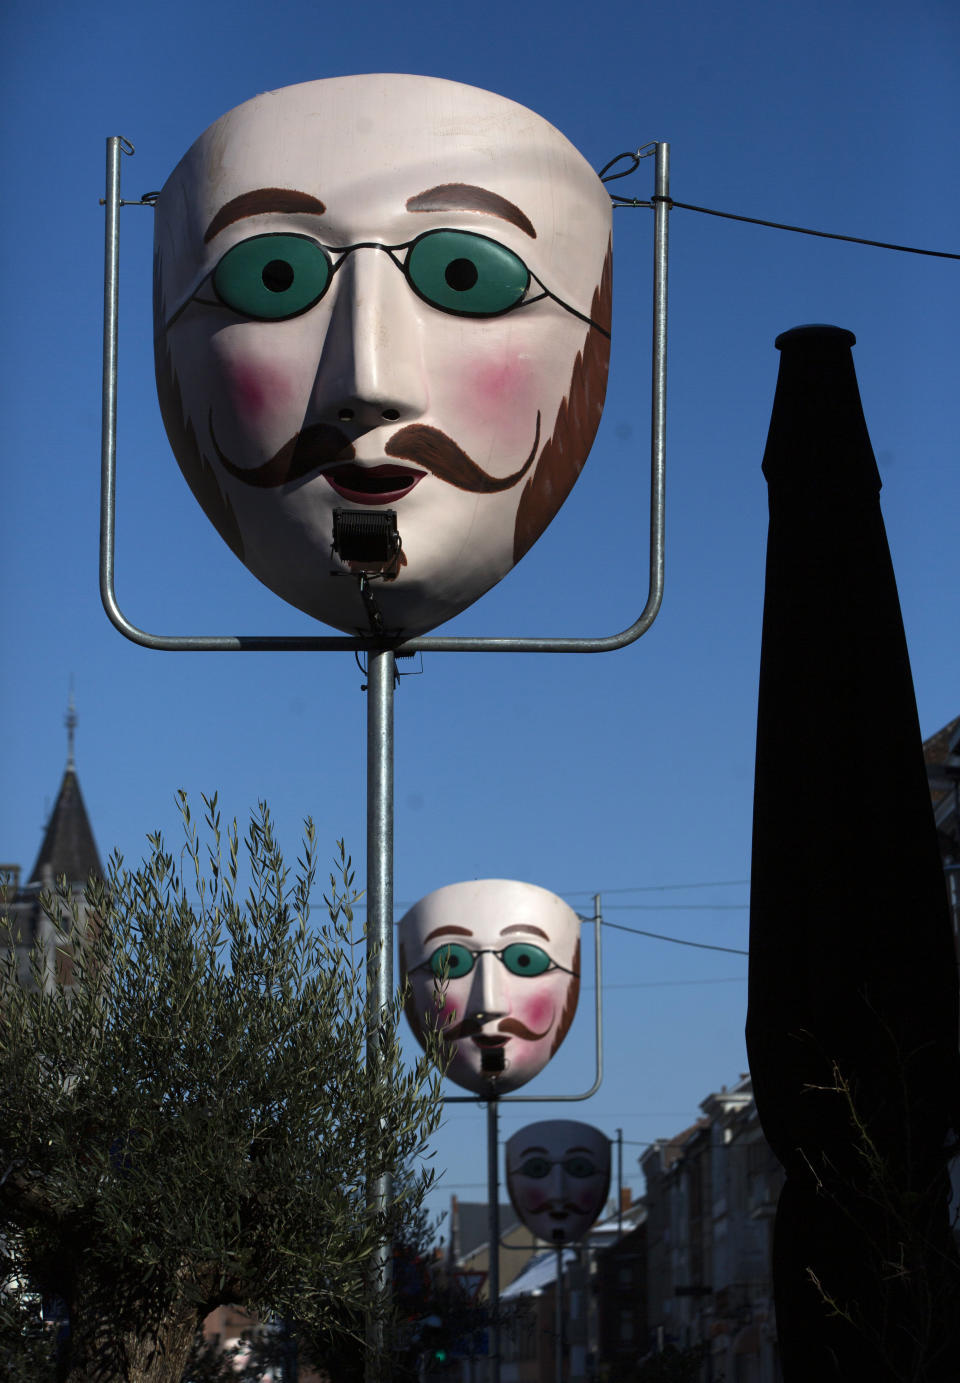 Giant re-creations of the cotton and wax mask worn by the Gilles de Binche sit atop of poles in Binche, Belgium, Thursday, Feb. 11, 2021. In normal life, the small town of Binche in southern Belgium would be bursting with excitement for the carnival festivities that have been labeled a 'Masterpiece of the Oral and Intangible Heritage of Humanity' by UNESCO, but in 2021 the COVID-19 regulations have forced the carnival to be cancelled.(AP Photo/Virginia Mayo)